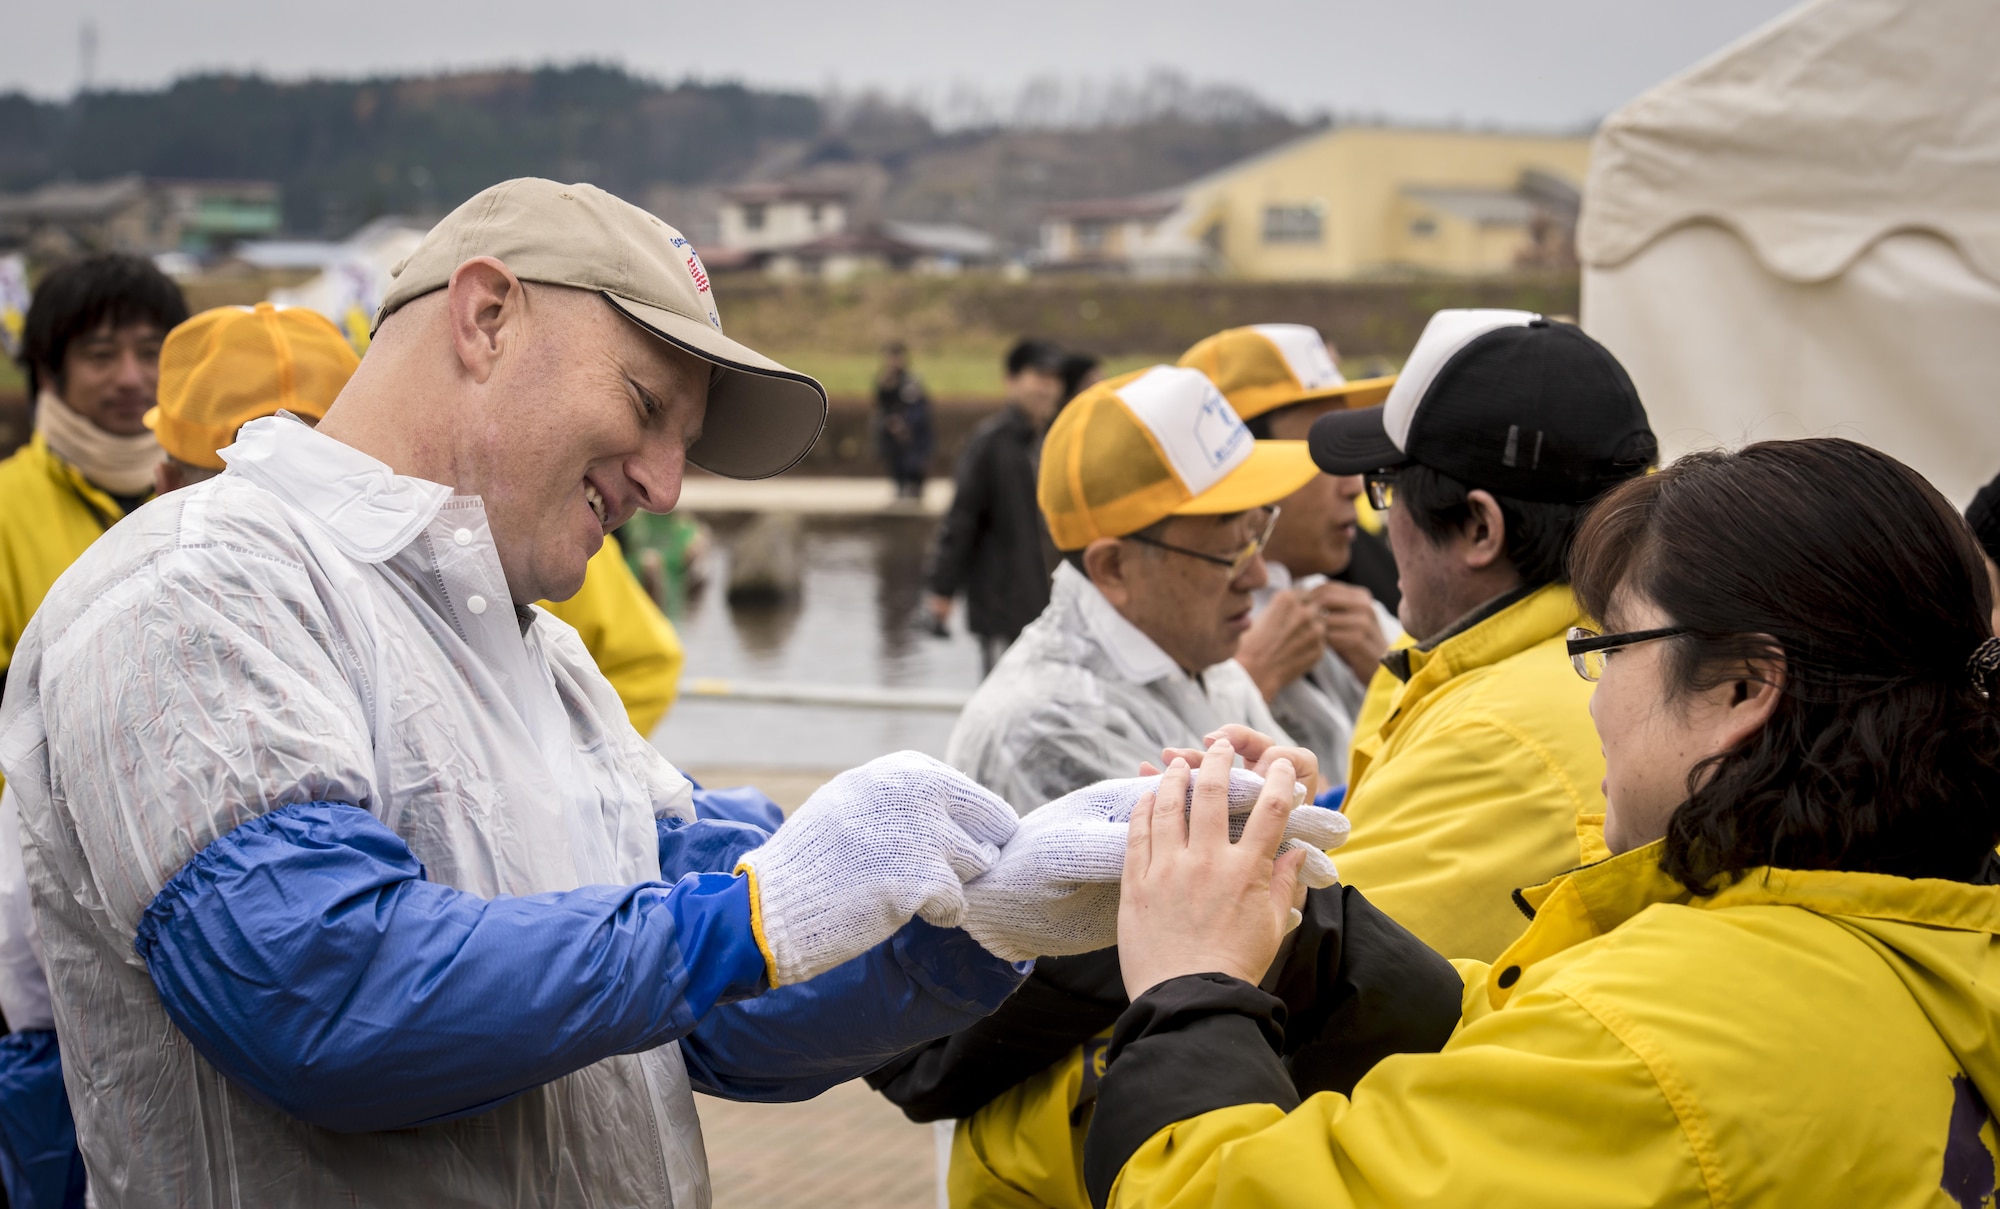 U.S. Air Force Col. Travis Rex, the 35th Fighter Wing vice commander, dons personal protective gear and waterproofing prior to joining several other regional Japanese leaders for the opening salmon catching demonstration to the 11th Annual Salmon Festival in Oirase, Japan, Nov. 19, 2016. After catching the salmon, event attendees learned how to properly fillet their prizes. The event included salmon racing, dozens of food booths and numerous music performances. (U.S. Air Force photo by Staff Sgt. Benjamin W. Stratton)